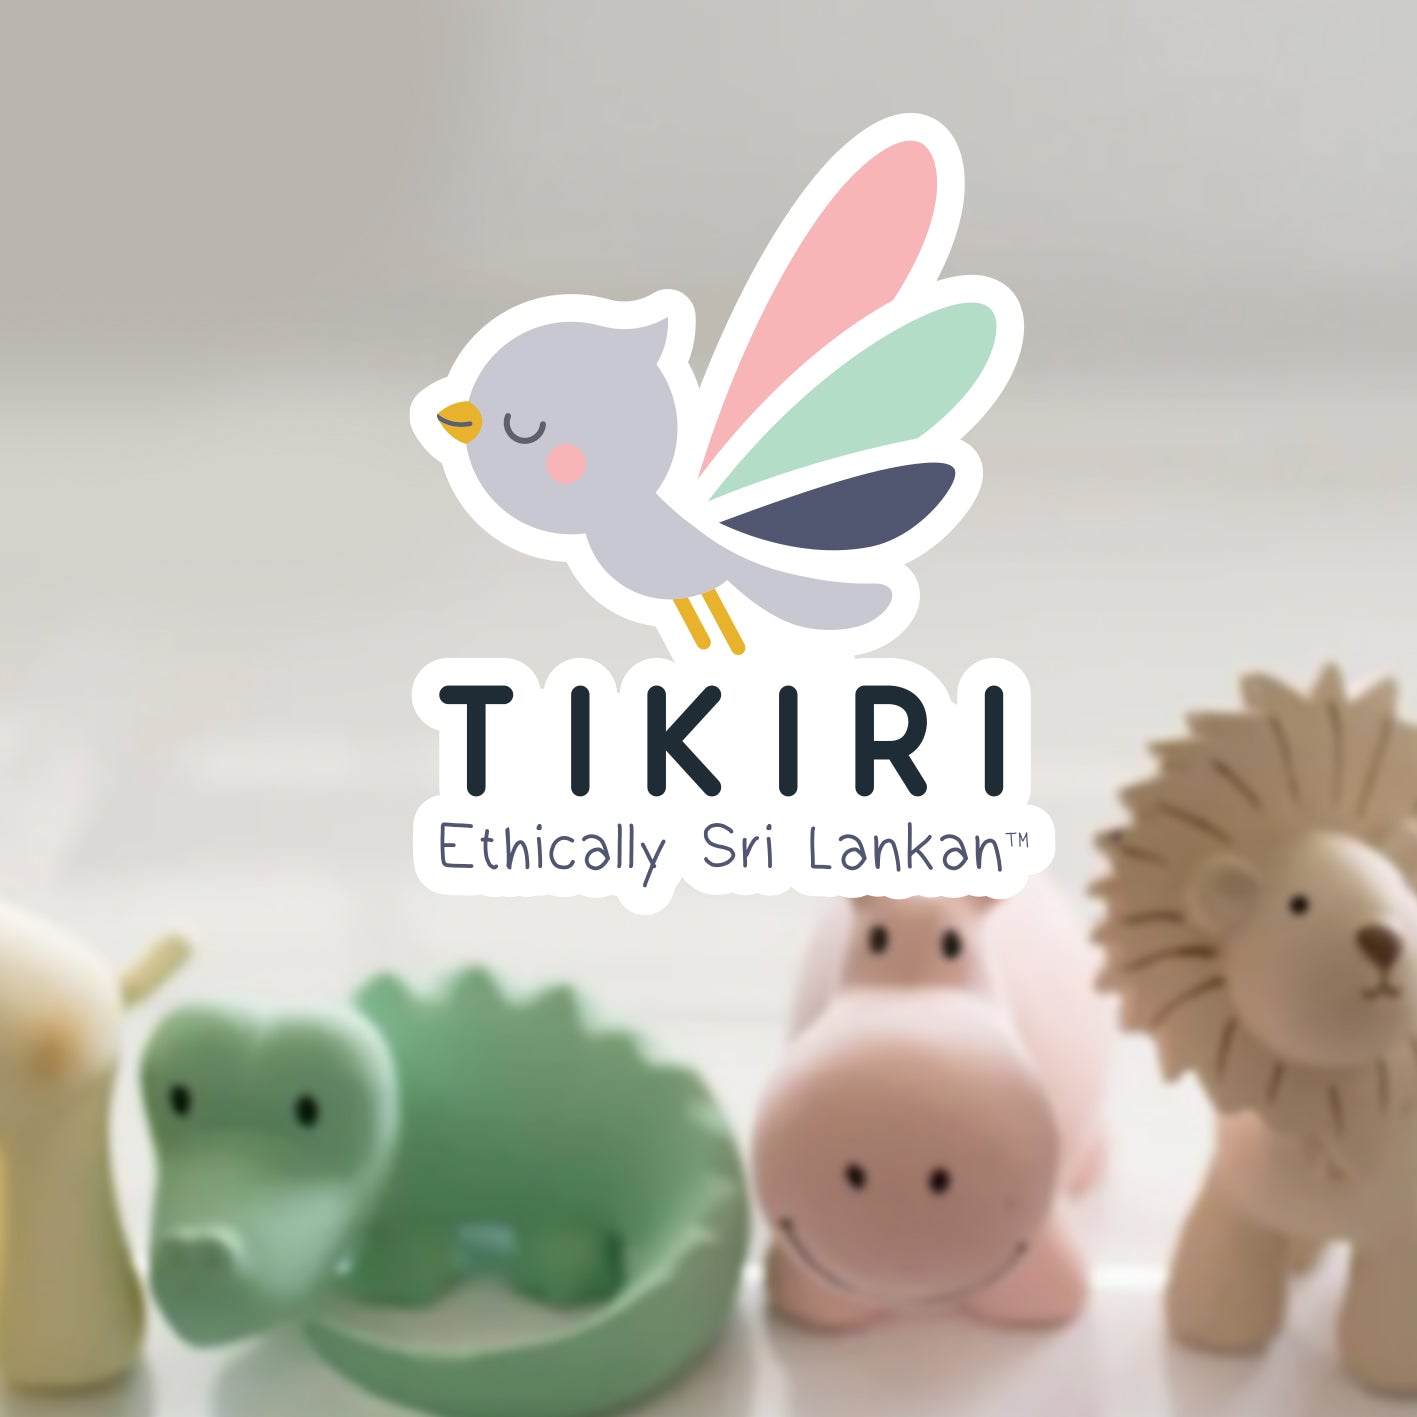 Branding & Illustrations - Eco-friendly early learning toys